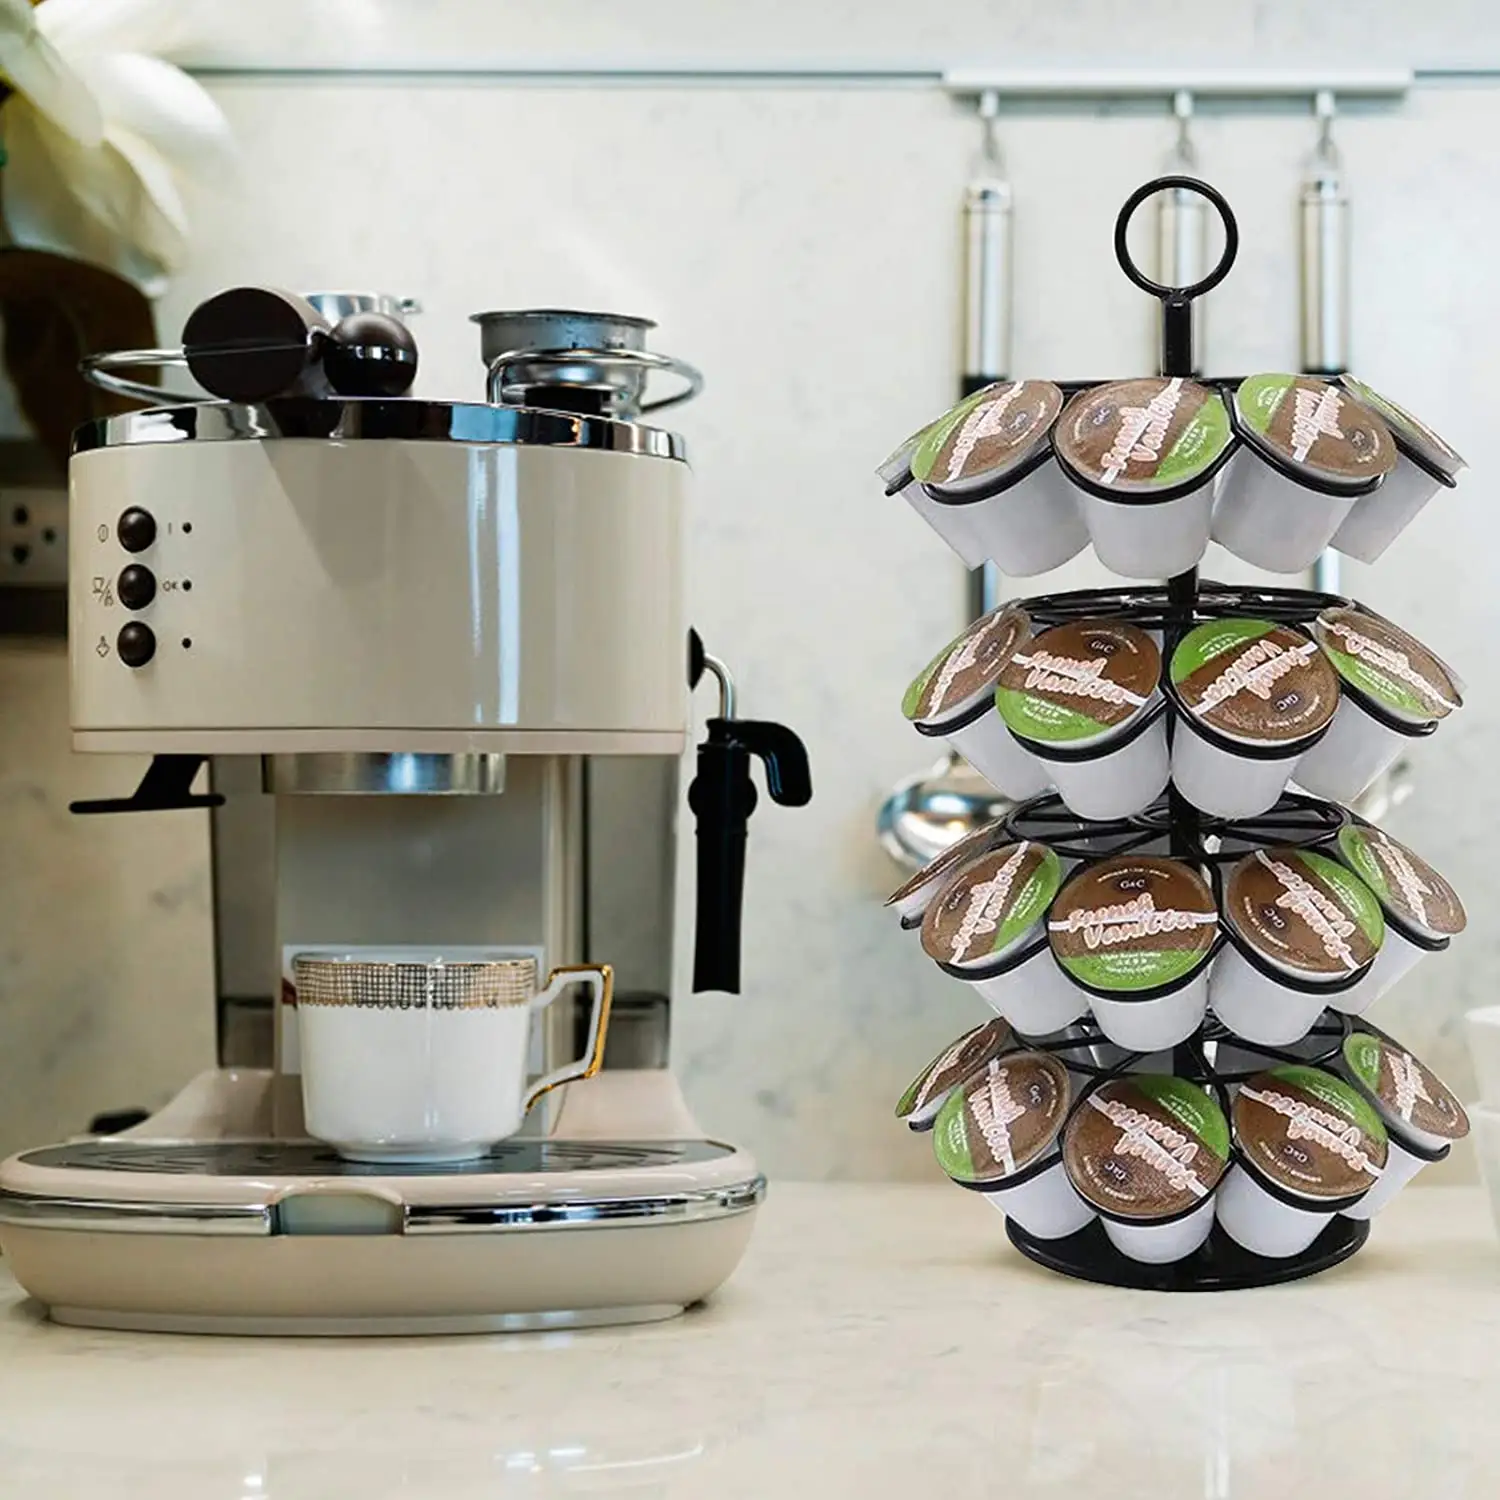 Stock K Cup Holder Coffee Capsule Holders for 36 Cups Smooth Spinning Coffee Storage Rack Organizer Strong Iron Stand for Home